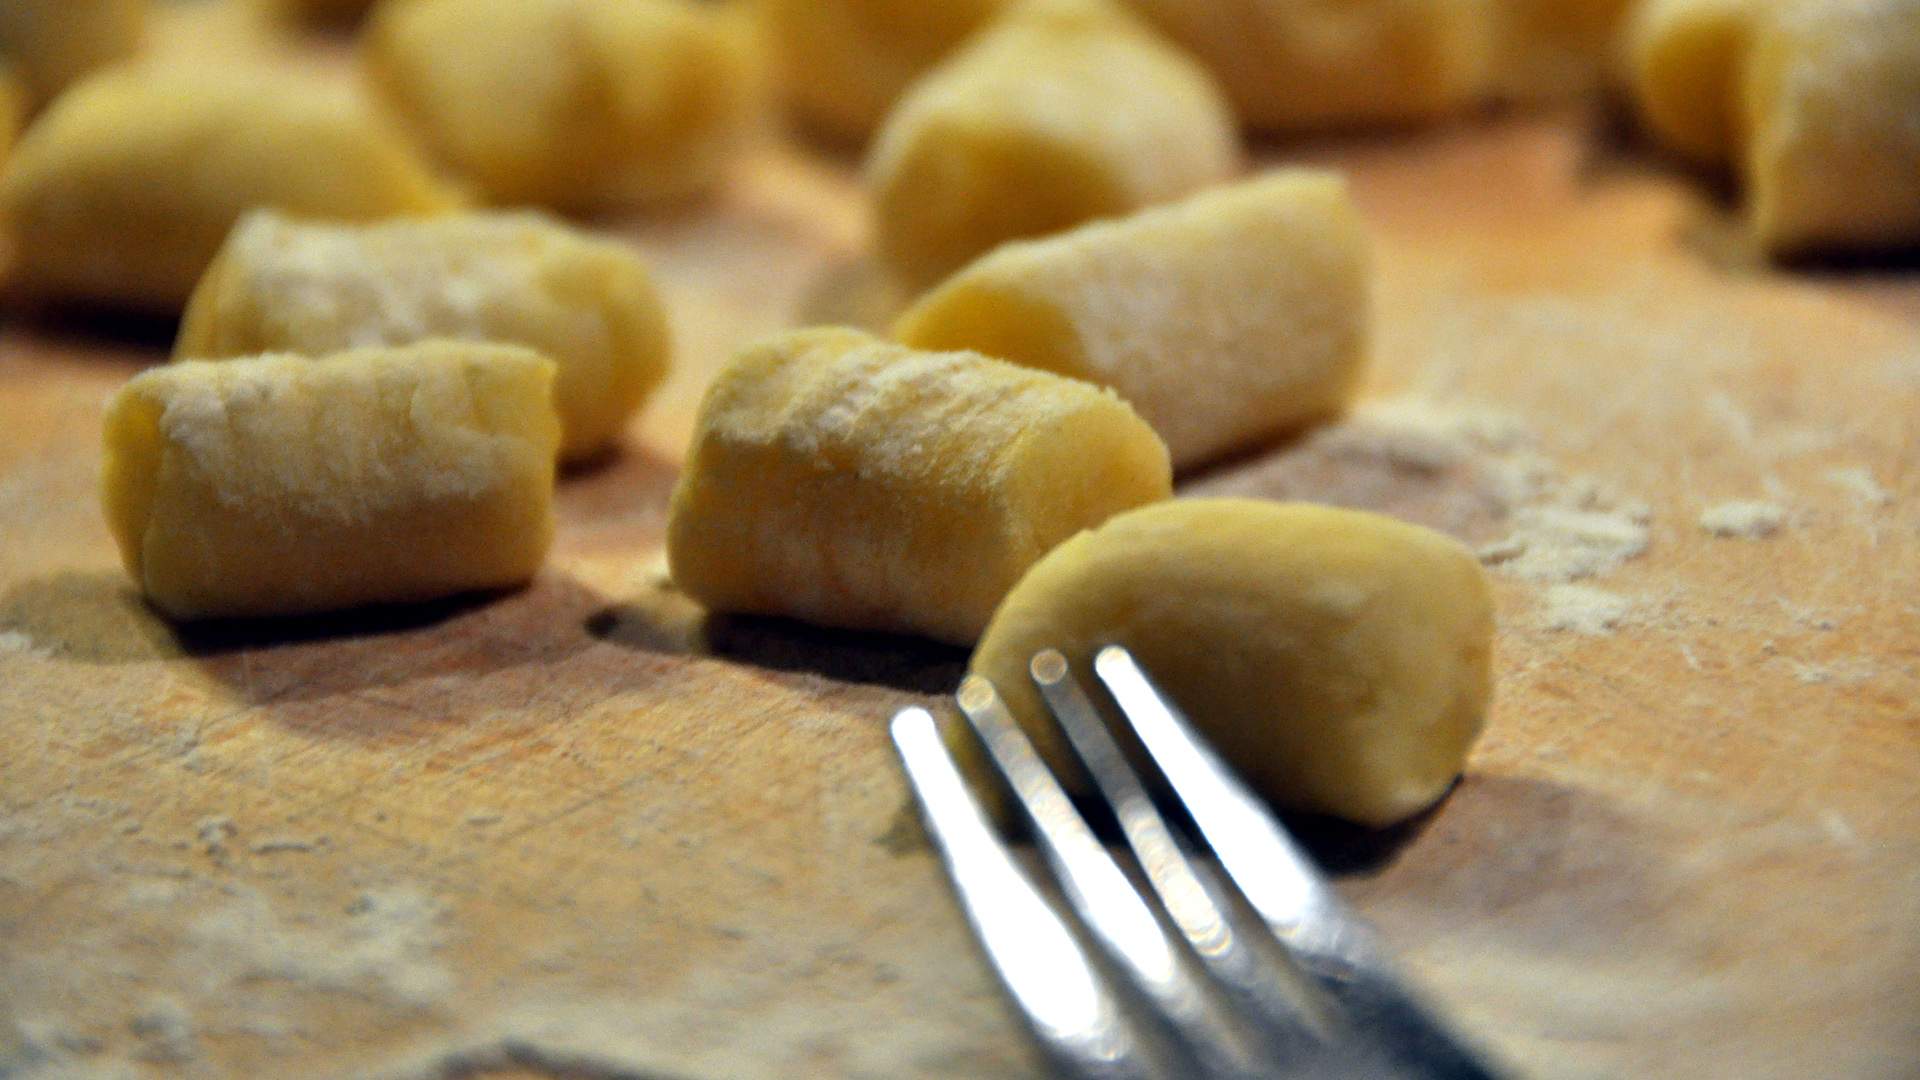 Gnocchi Gnocchi Brothers Has Opened a Takeaway-Only New Farm Store